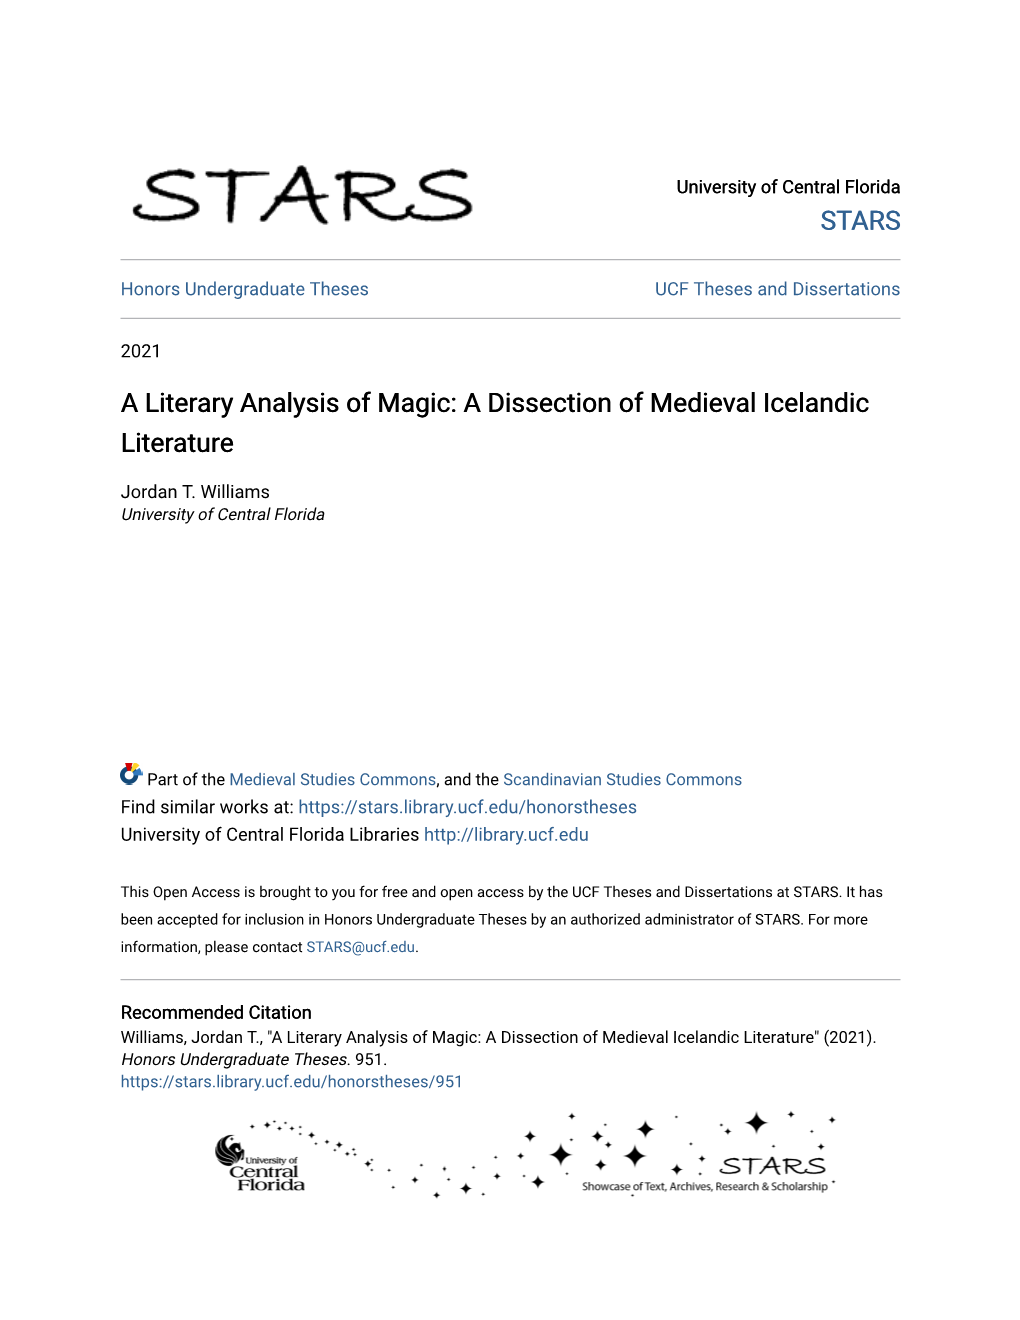 A Literary Analysis of Magic: a Dissection of Medieval Icelandic Literature